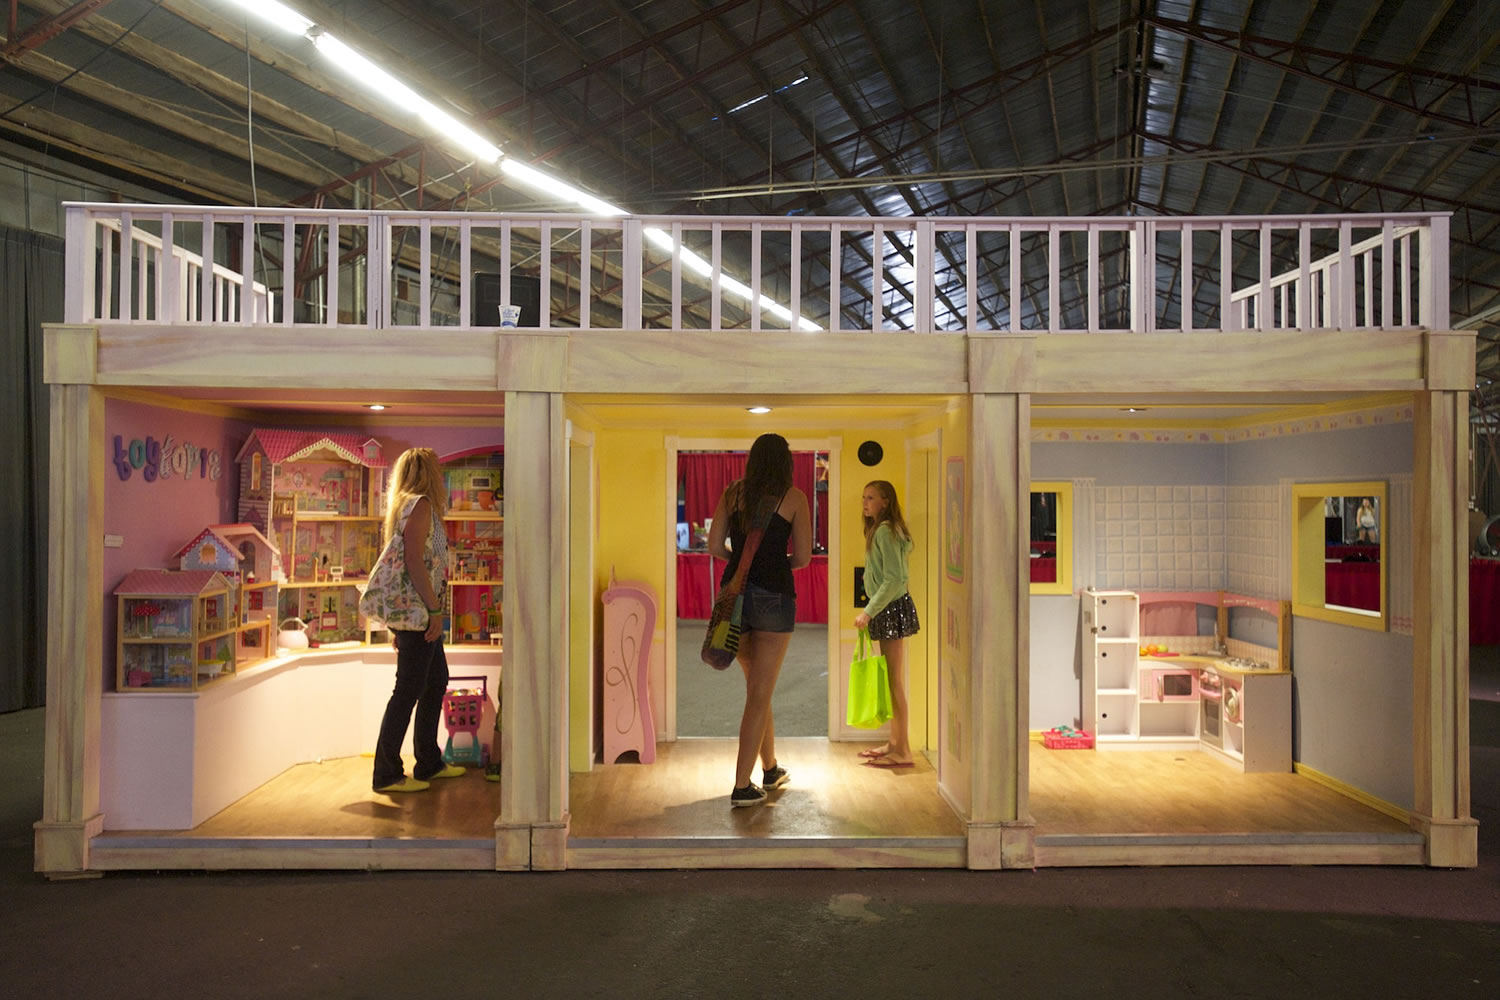 Visitors explore a life-size dollhouse at the interactive Toytopia exhibit at the Clark County Fair this week.